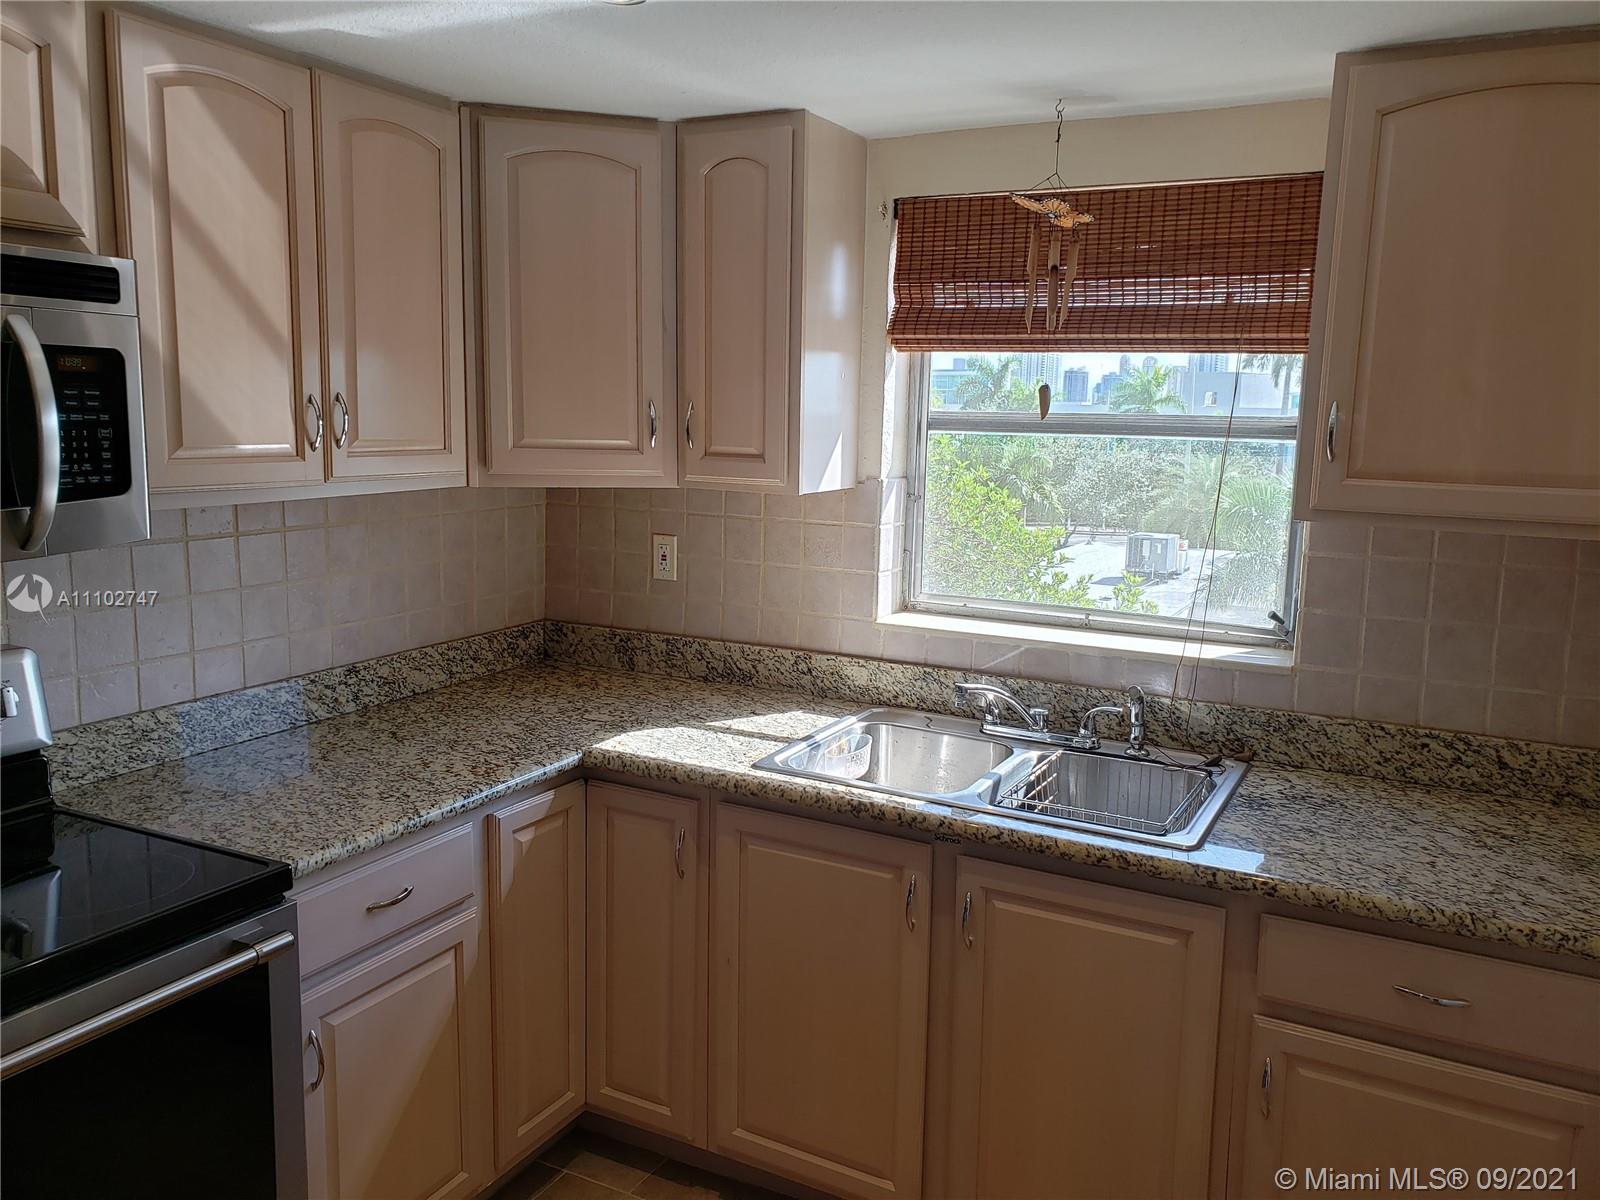 a kitchen with granite countertop stainless steel appliances window a sink and a counter space